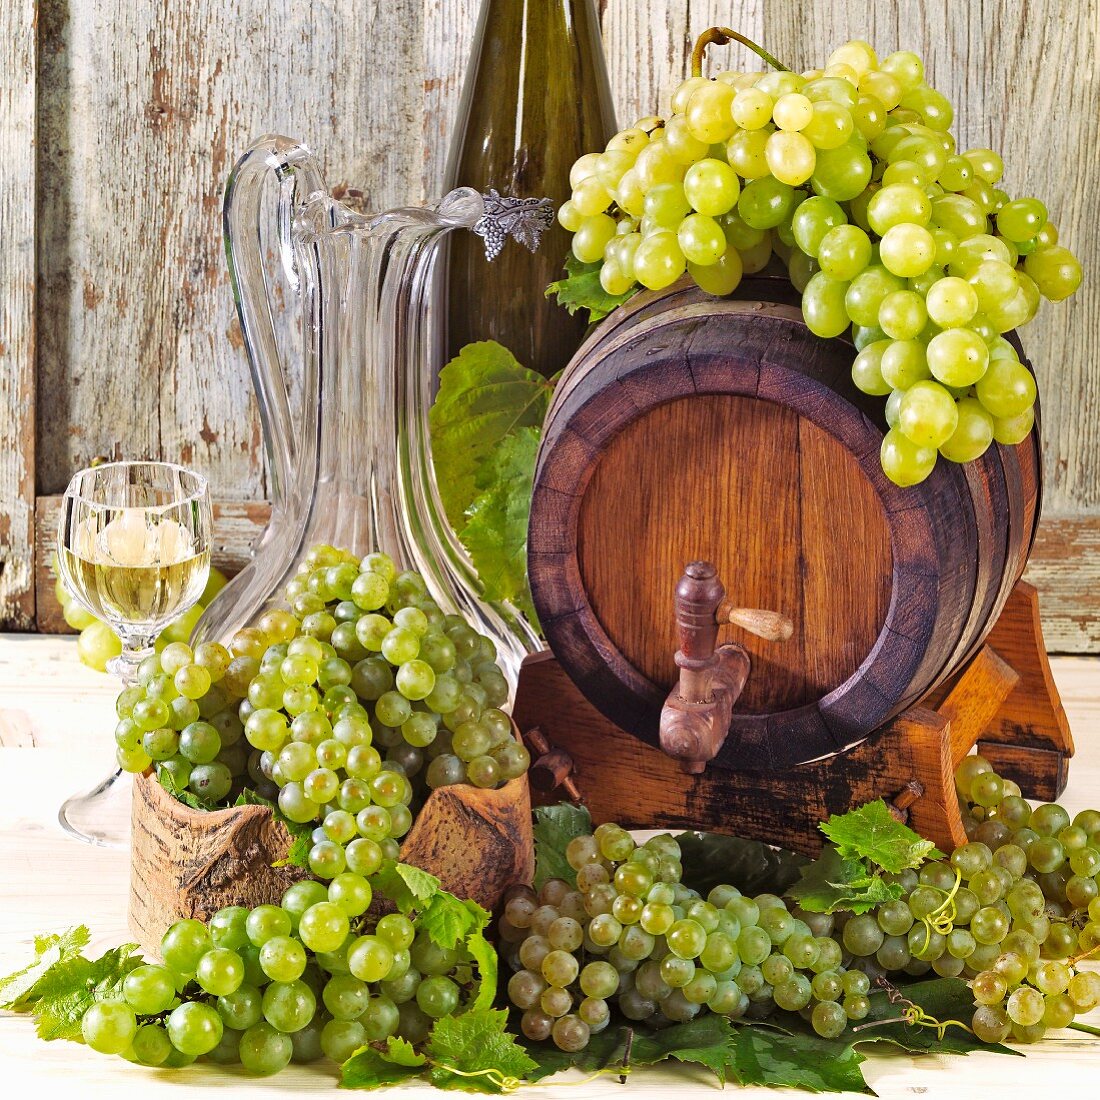 Still life with wine barrel and fresh grapes